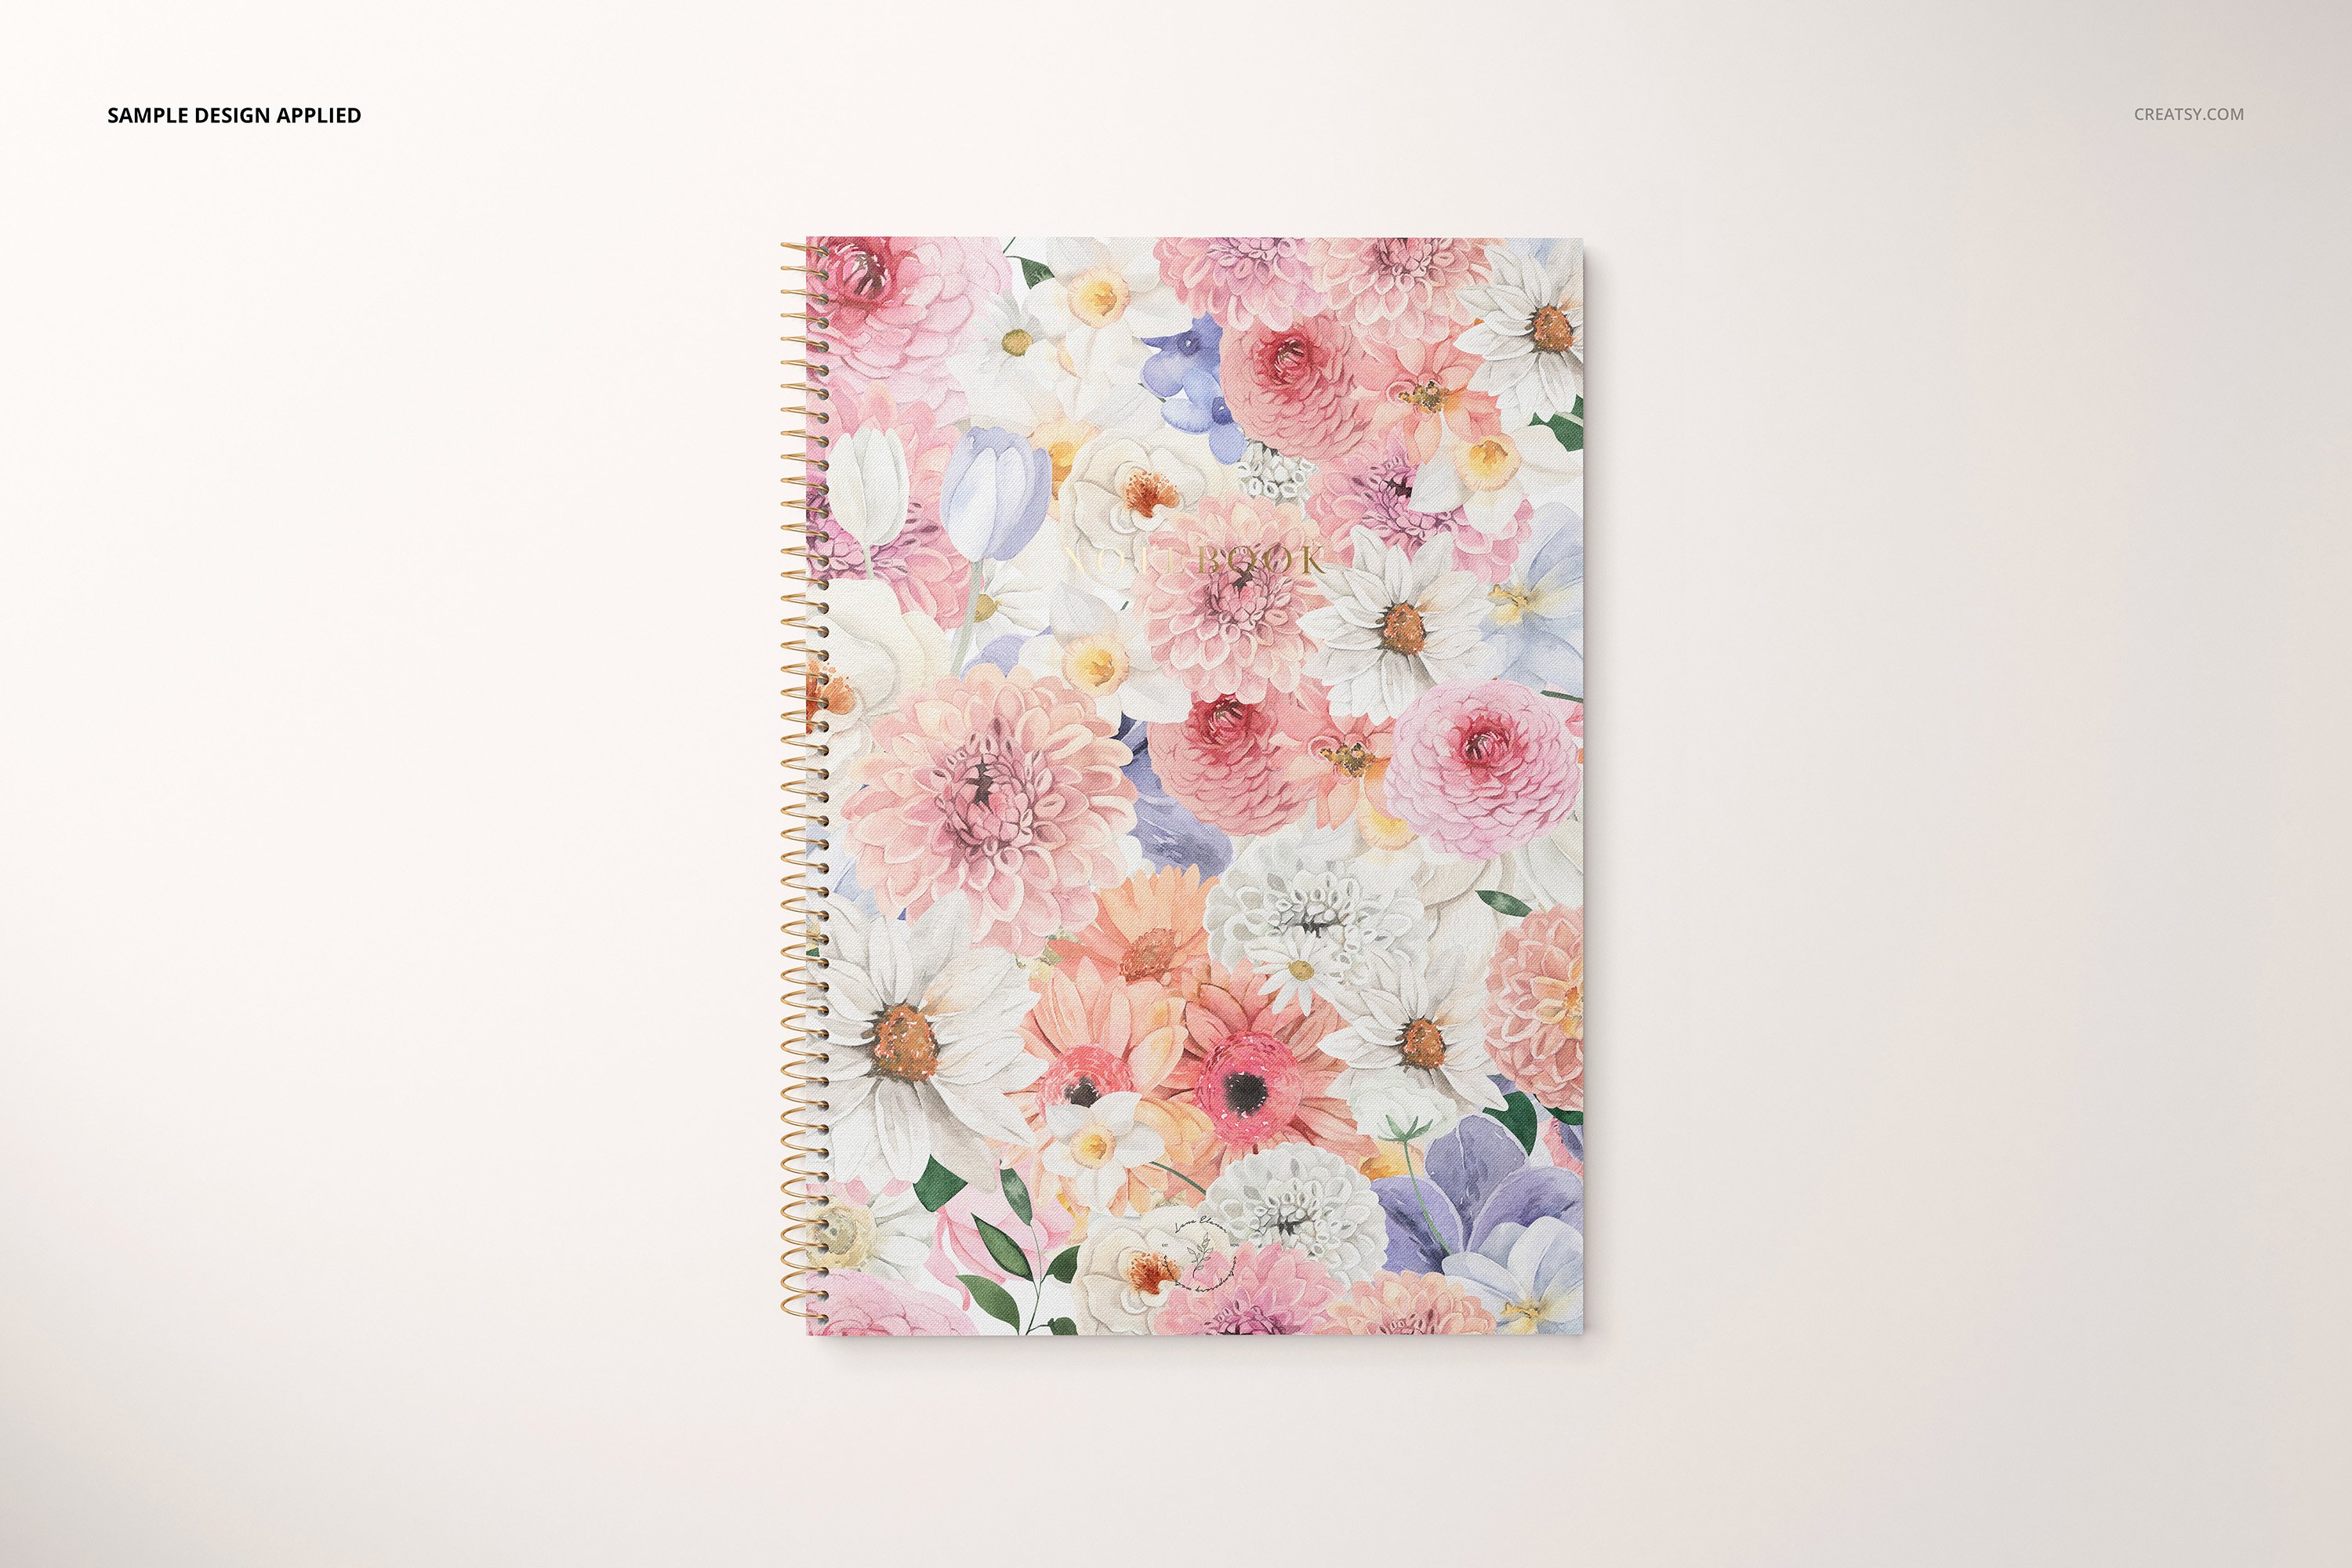 FLowers blossom notebook in a pastel.